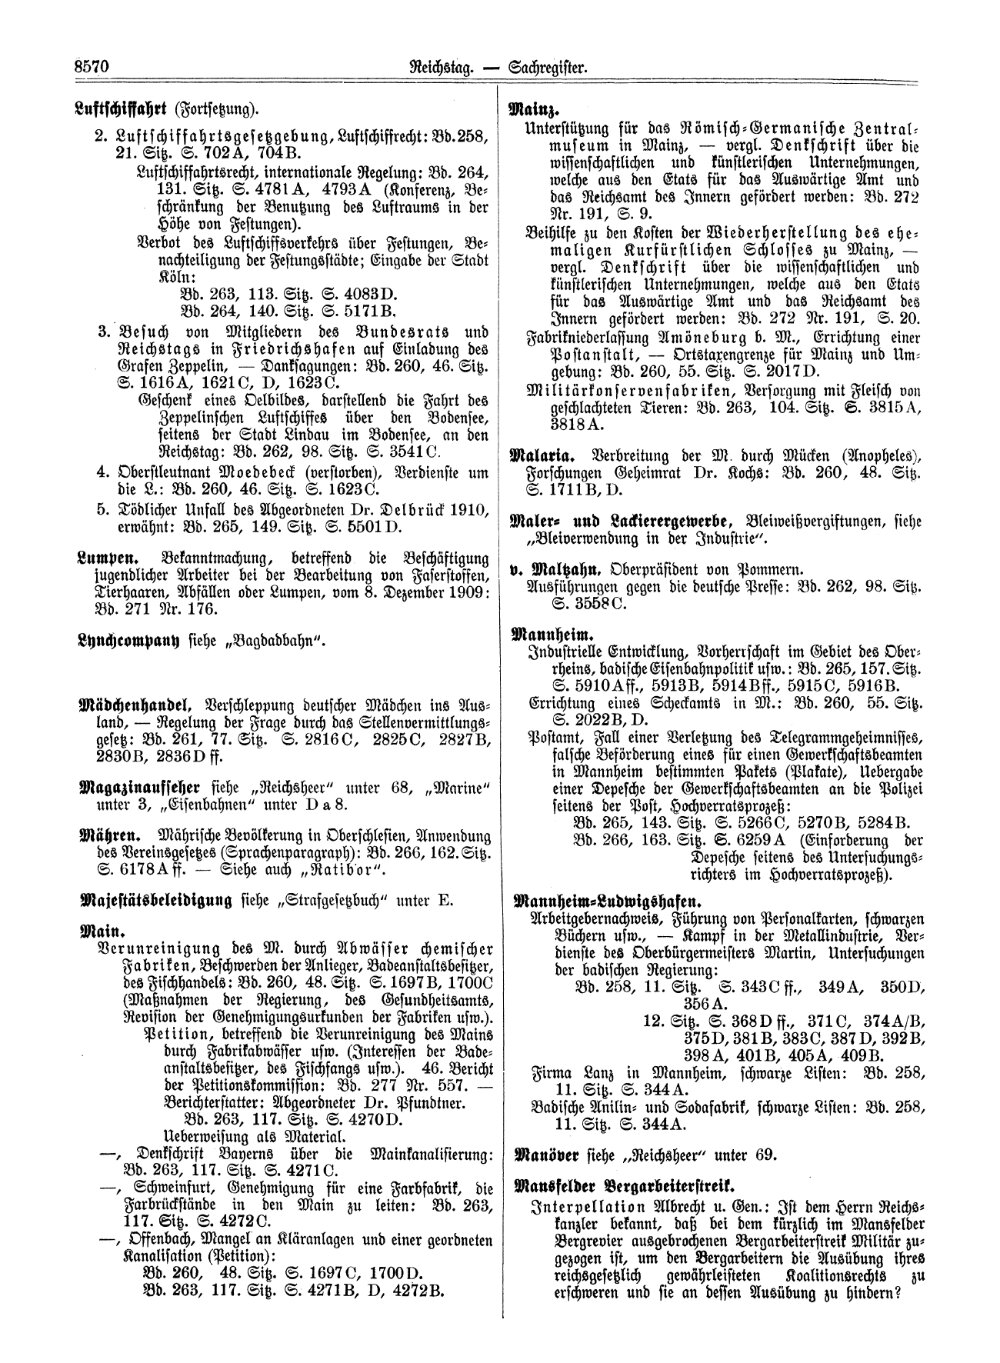 Scan of page 8570